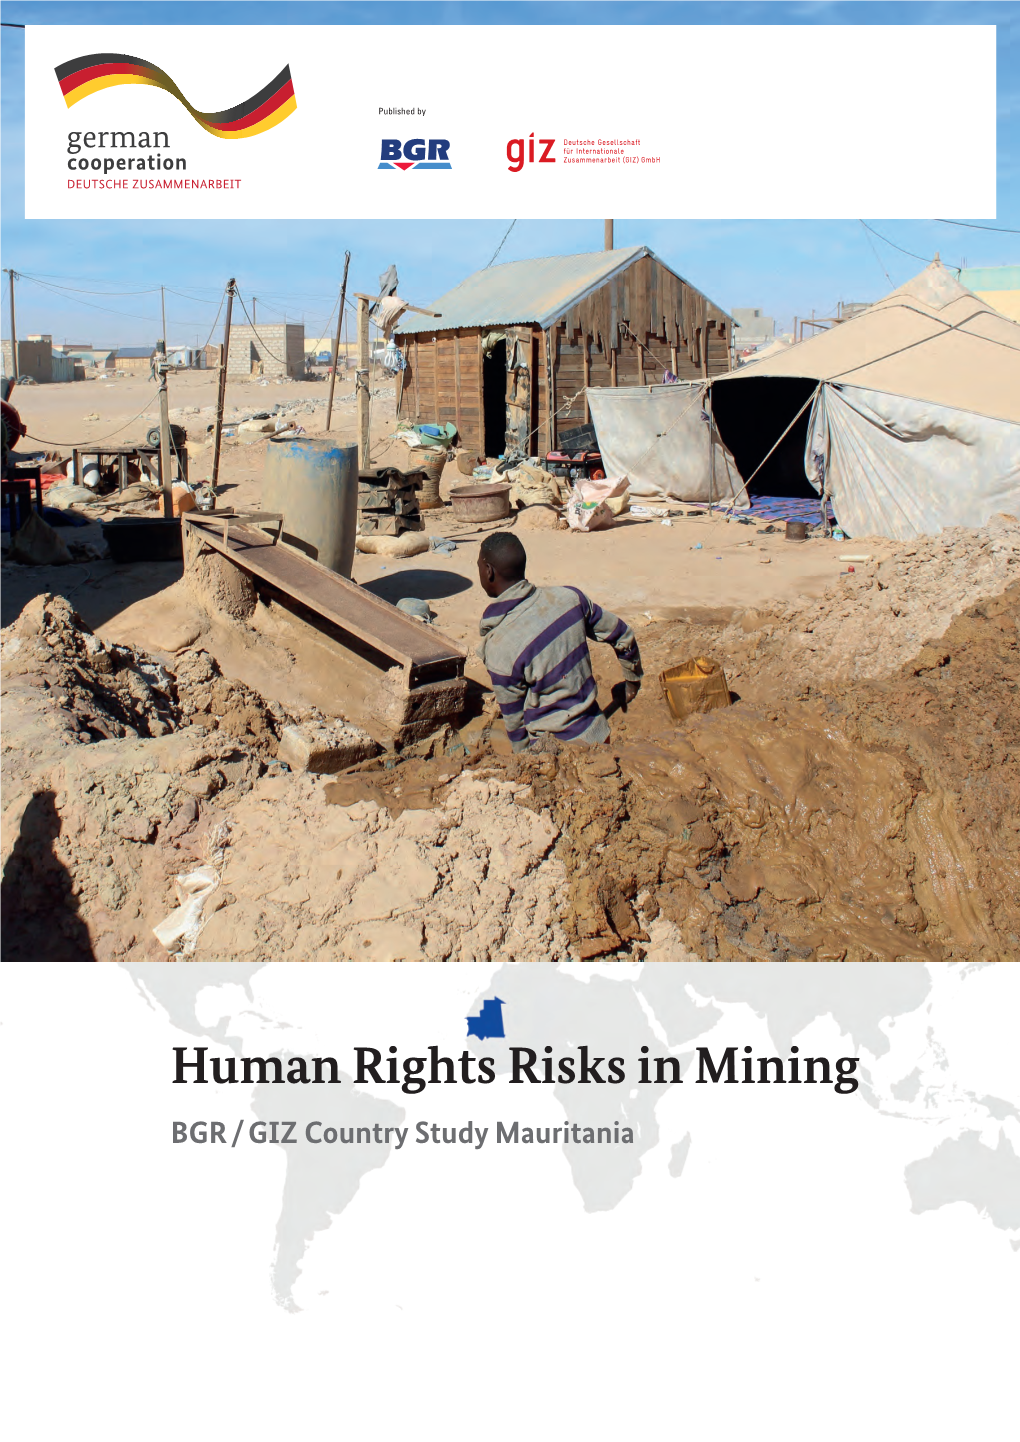 Human Rights Risks in Mining. BGR/GIZ Country Study Mauritania 2018